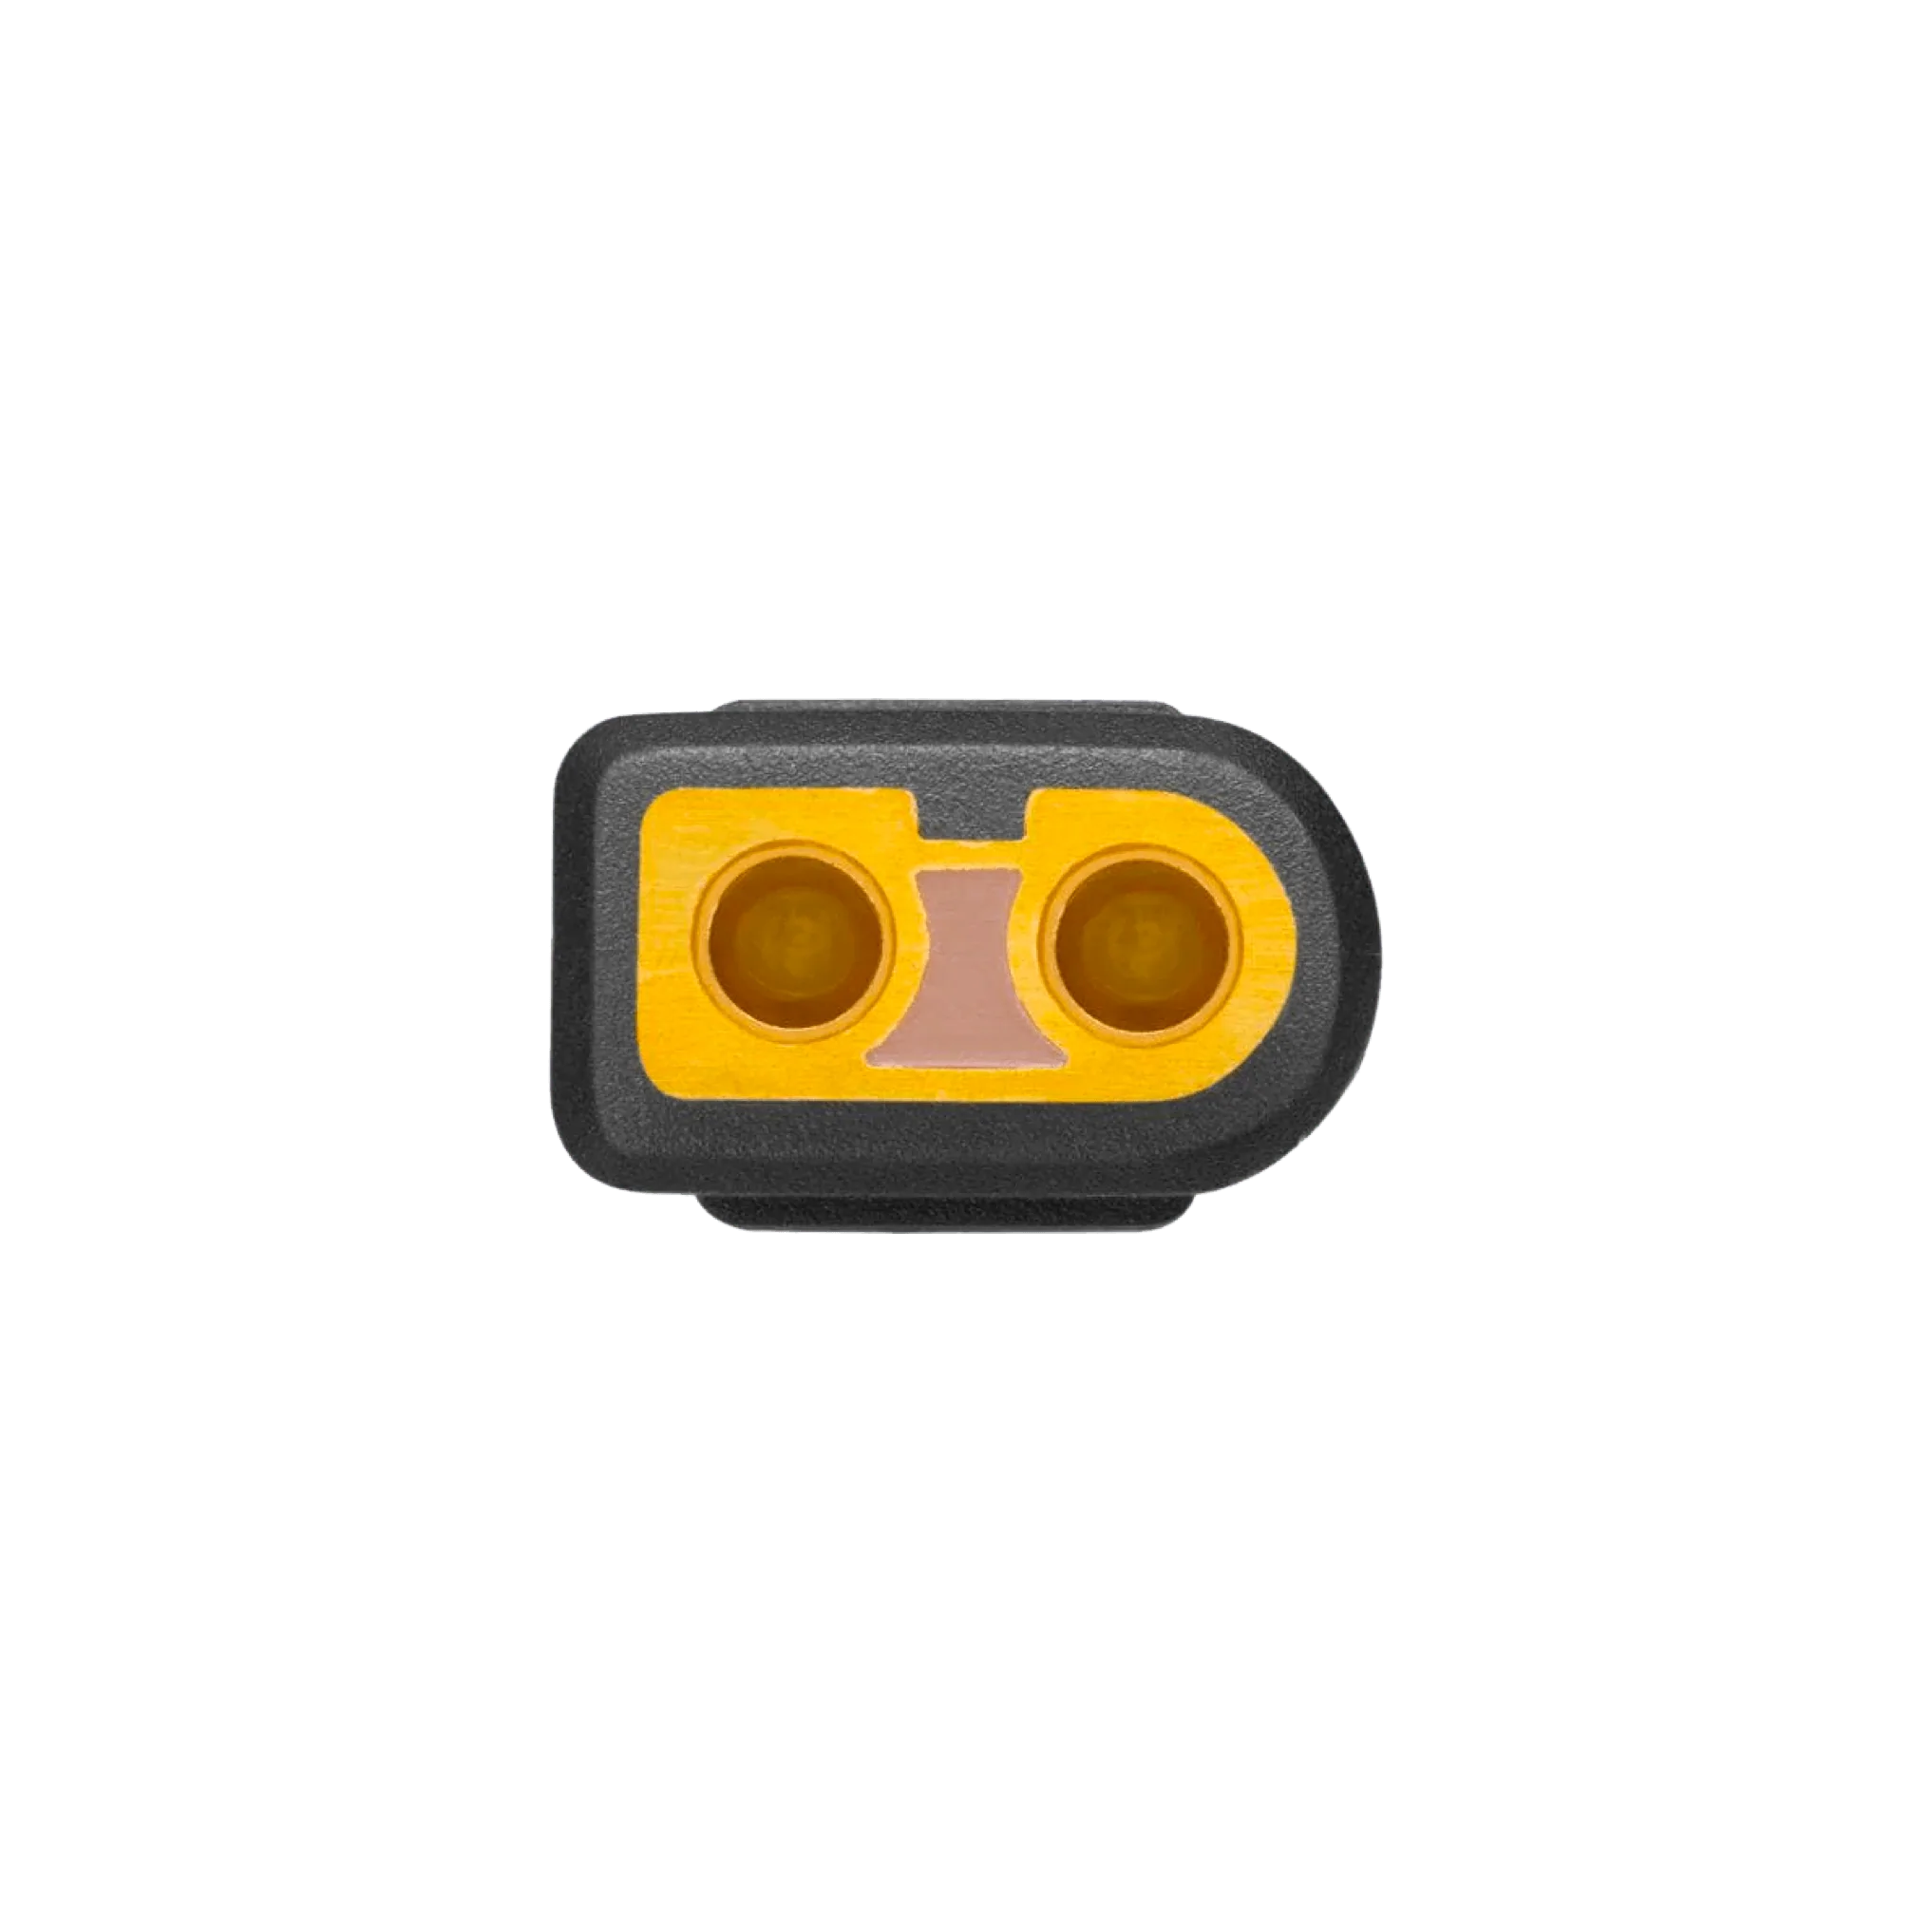 A yellow and black flashlight on a white background featuring EcoFlow Car Charging Cable (SHIPS IN 1-2 WEEKS).